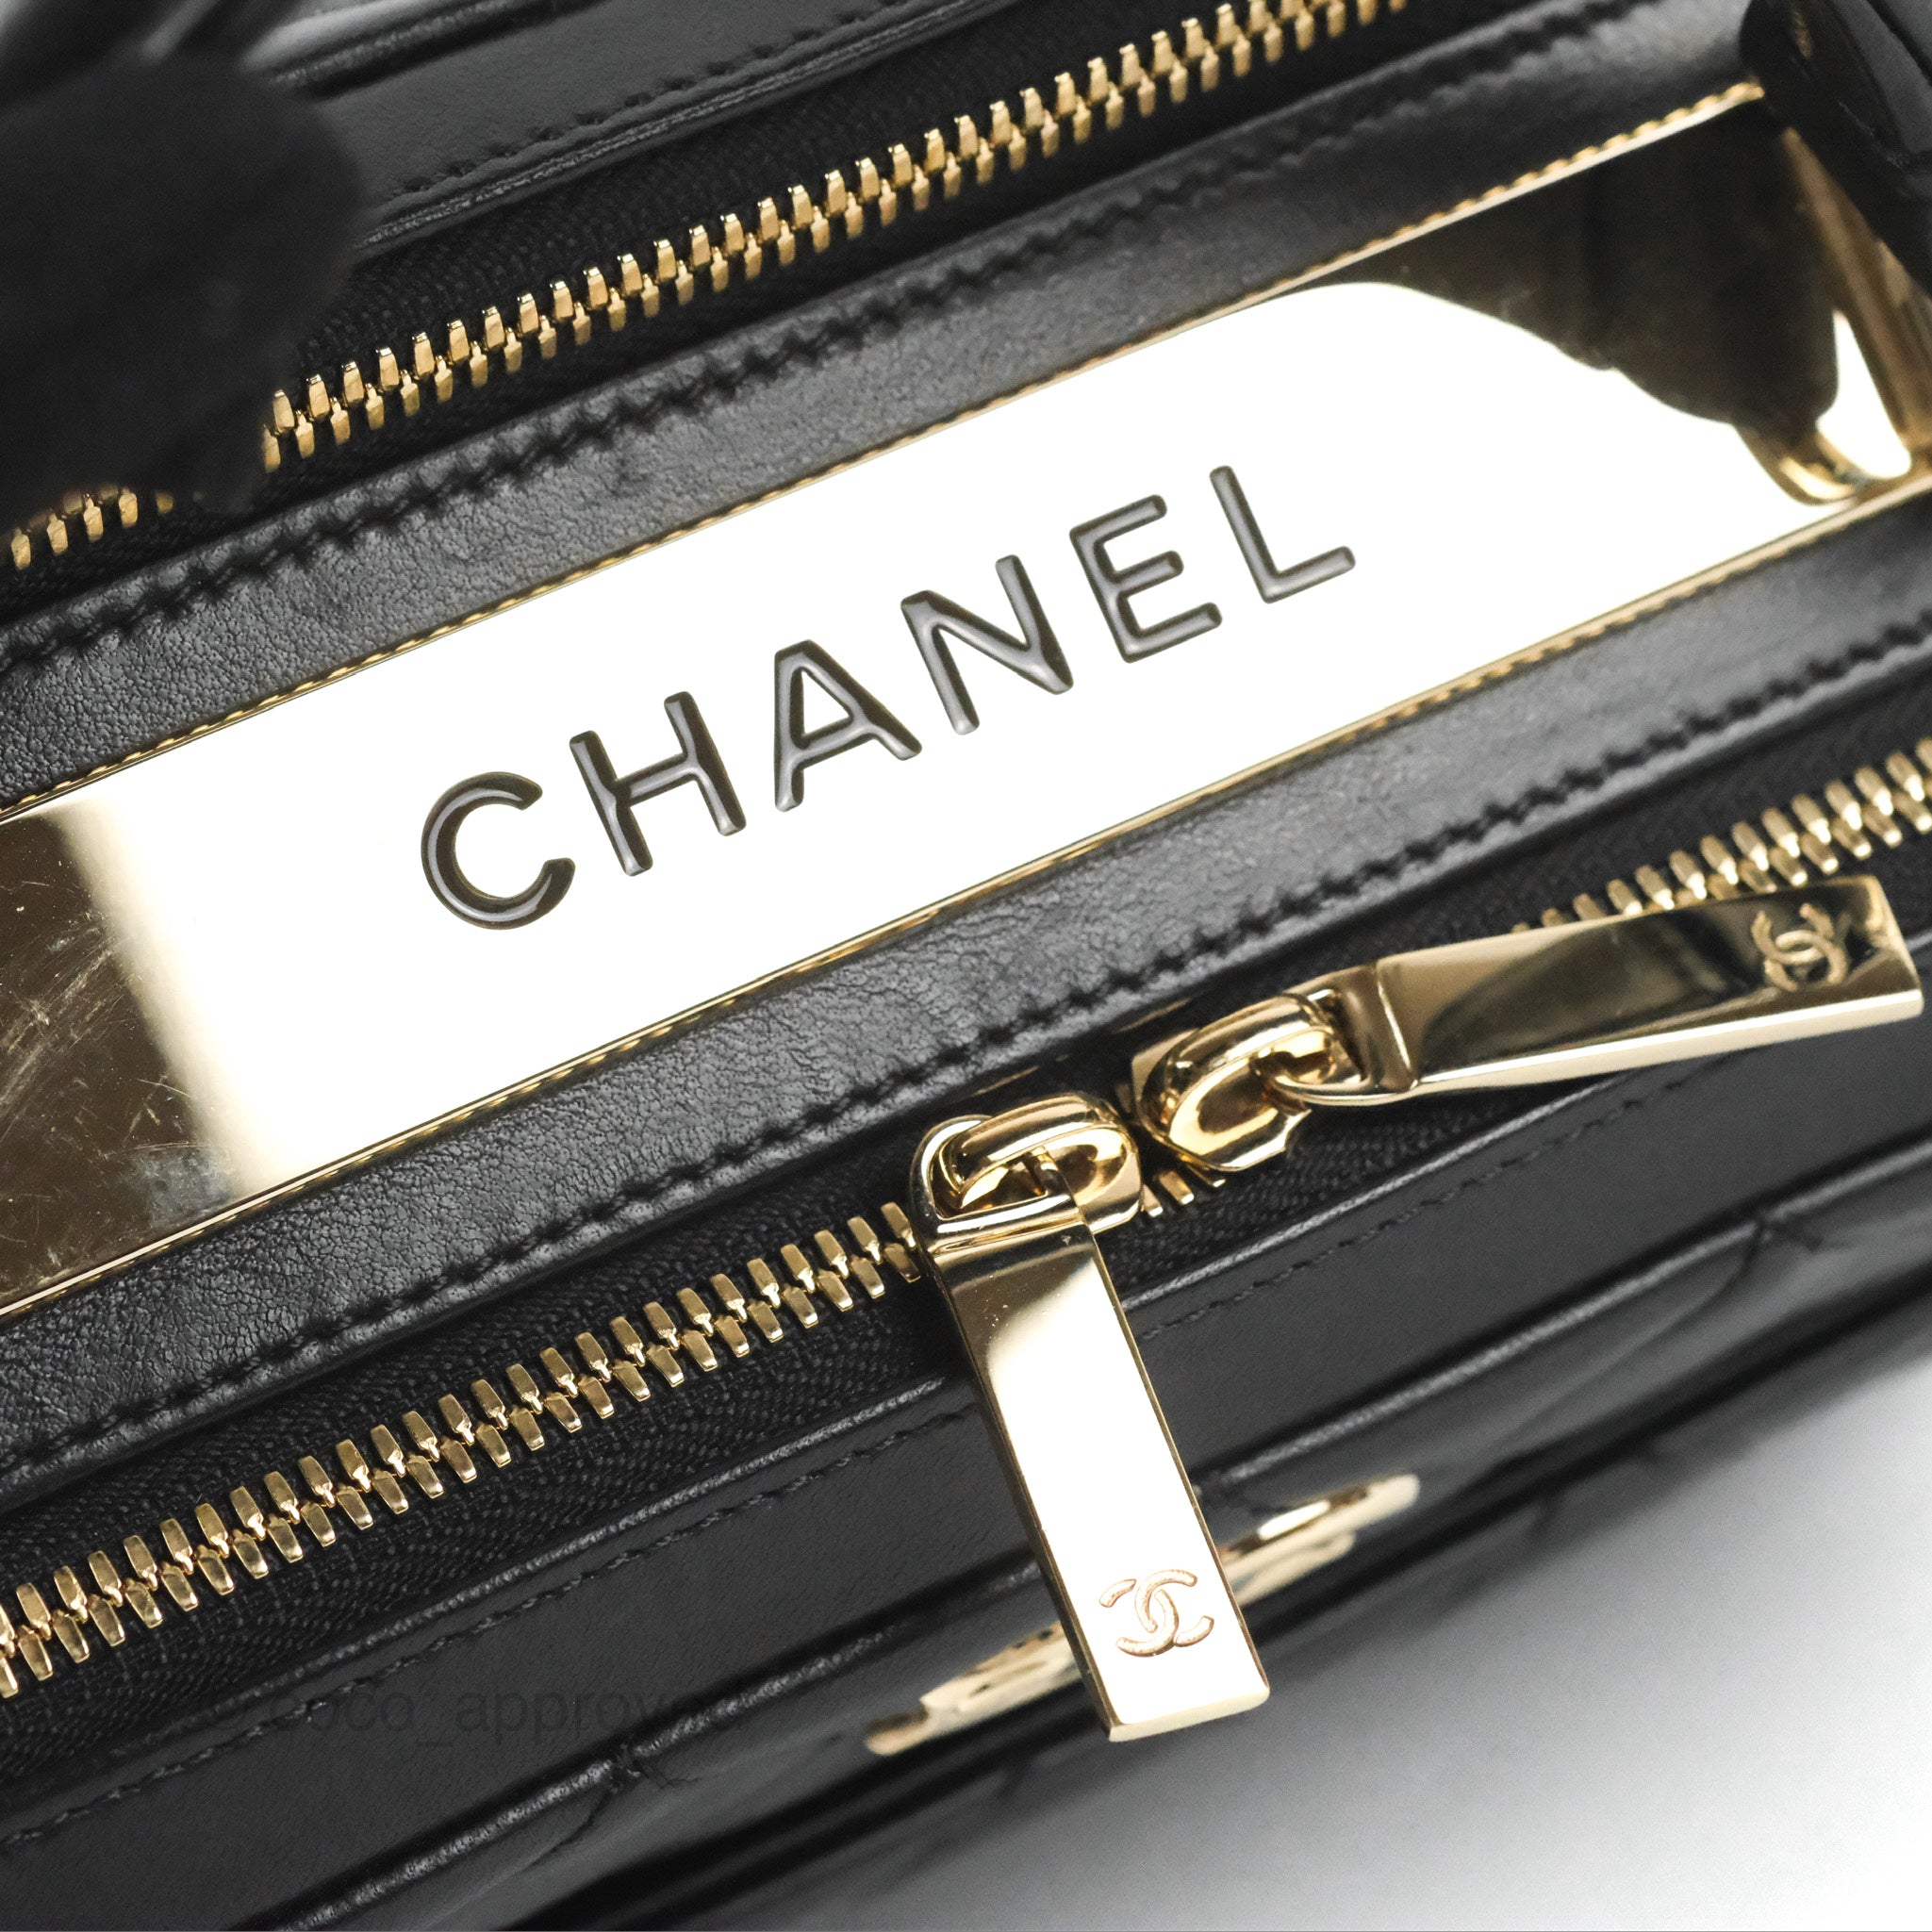 Chanel Quilted Small Trendy CC Bowling Bag Black Lambskin Gold Hardwar –  Coco Approved Studio